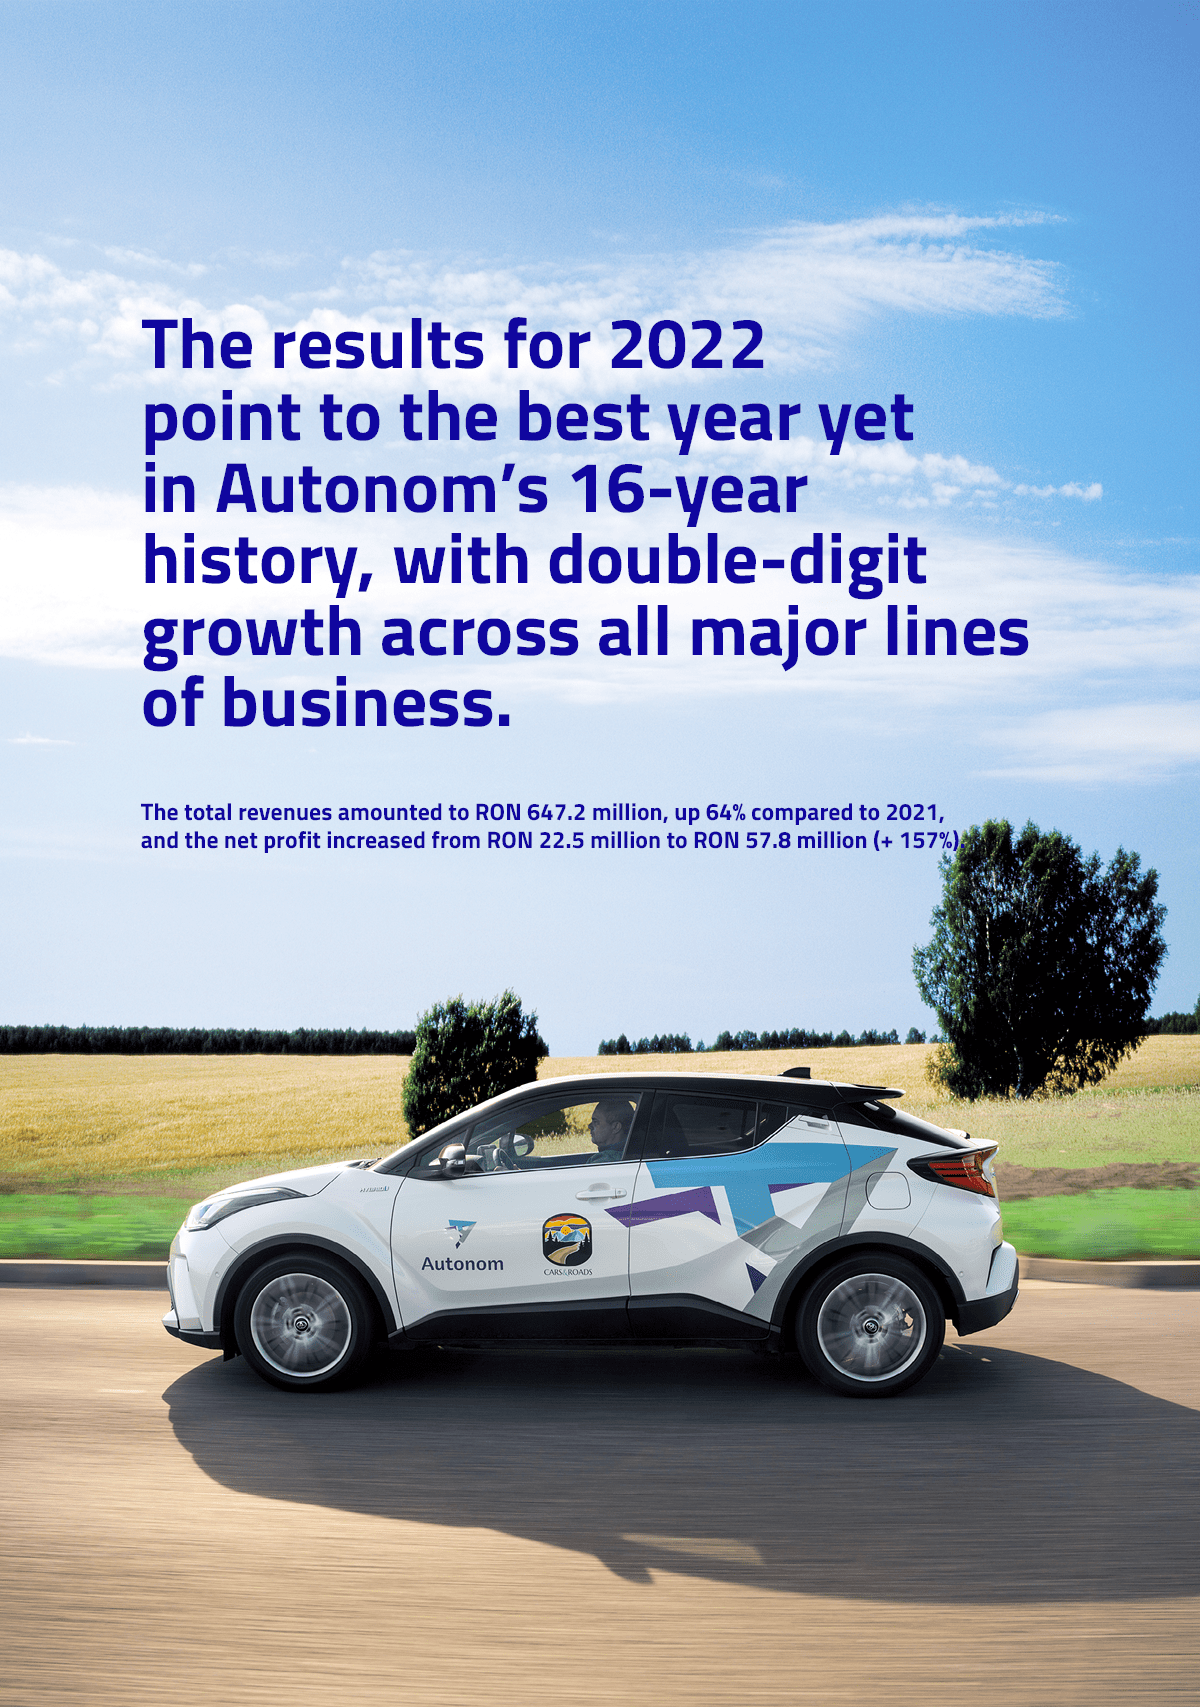 The results for 2022 point to the best year yet in Autonom’s 16-year history, with double-digit growth across all major lines of business.